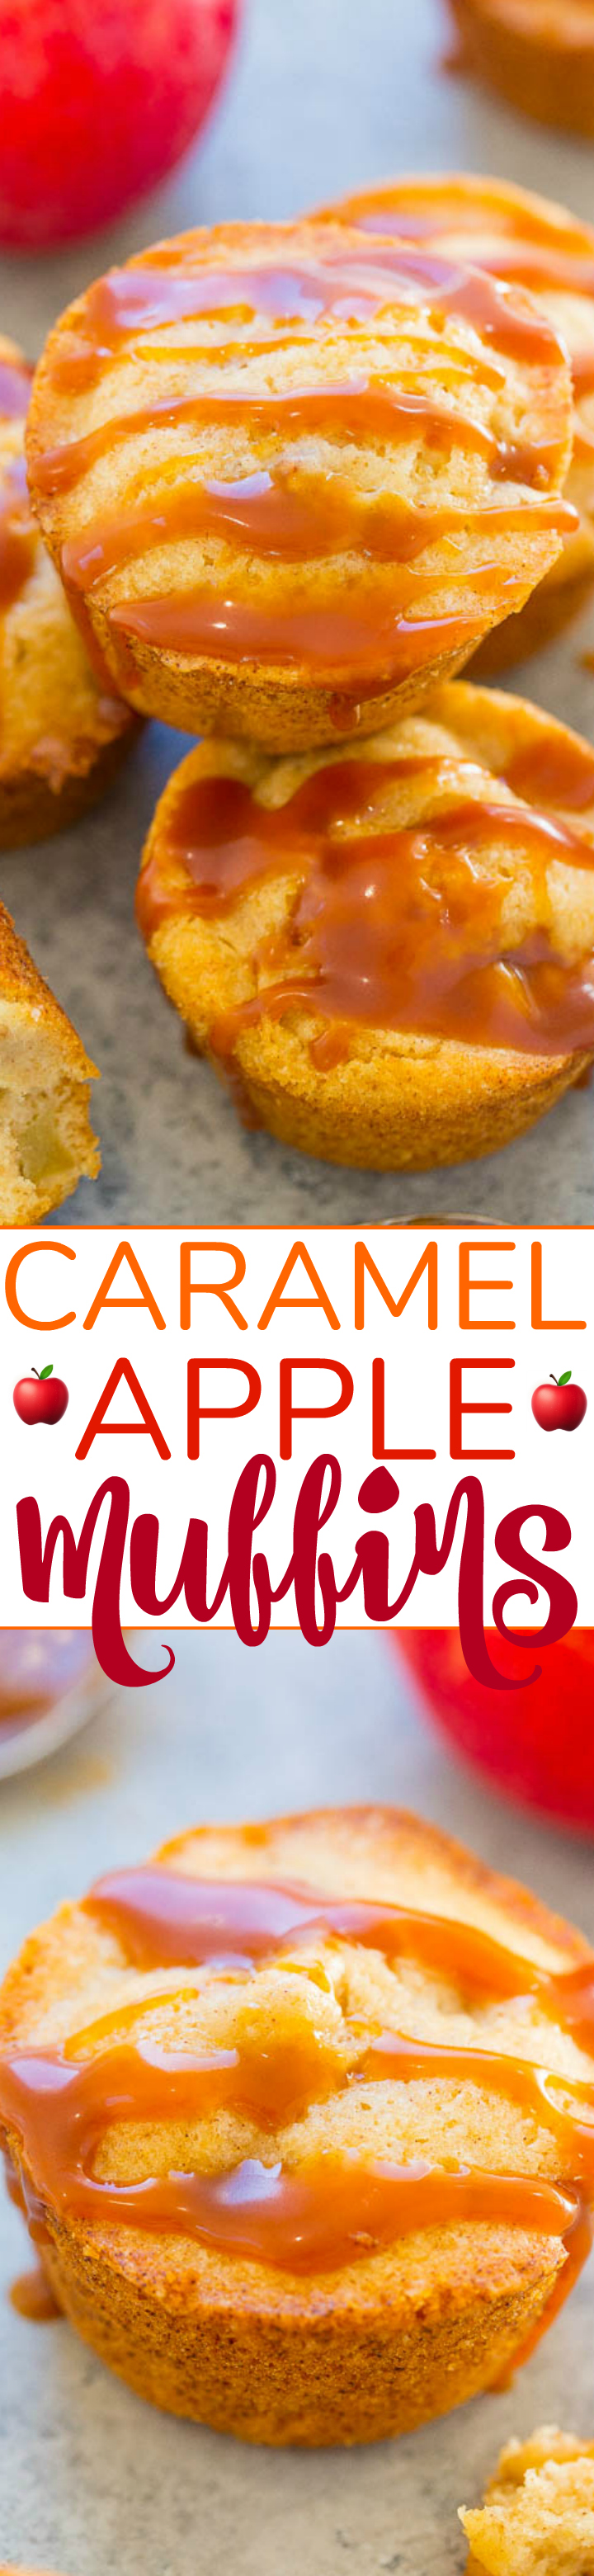 Caramel Apple Muffins - Soft, fluffy, springy, loaded with chunks of apples, and so much CARAMEL flavor!! EASY, no mixer needed, and you'd never guess they're accidentally vegan!! 